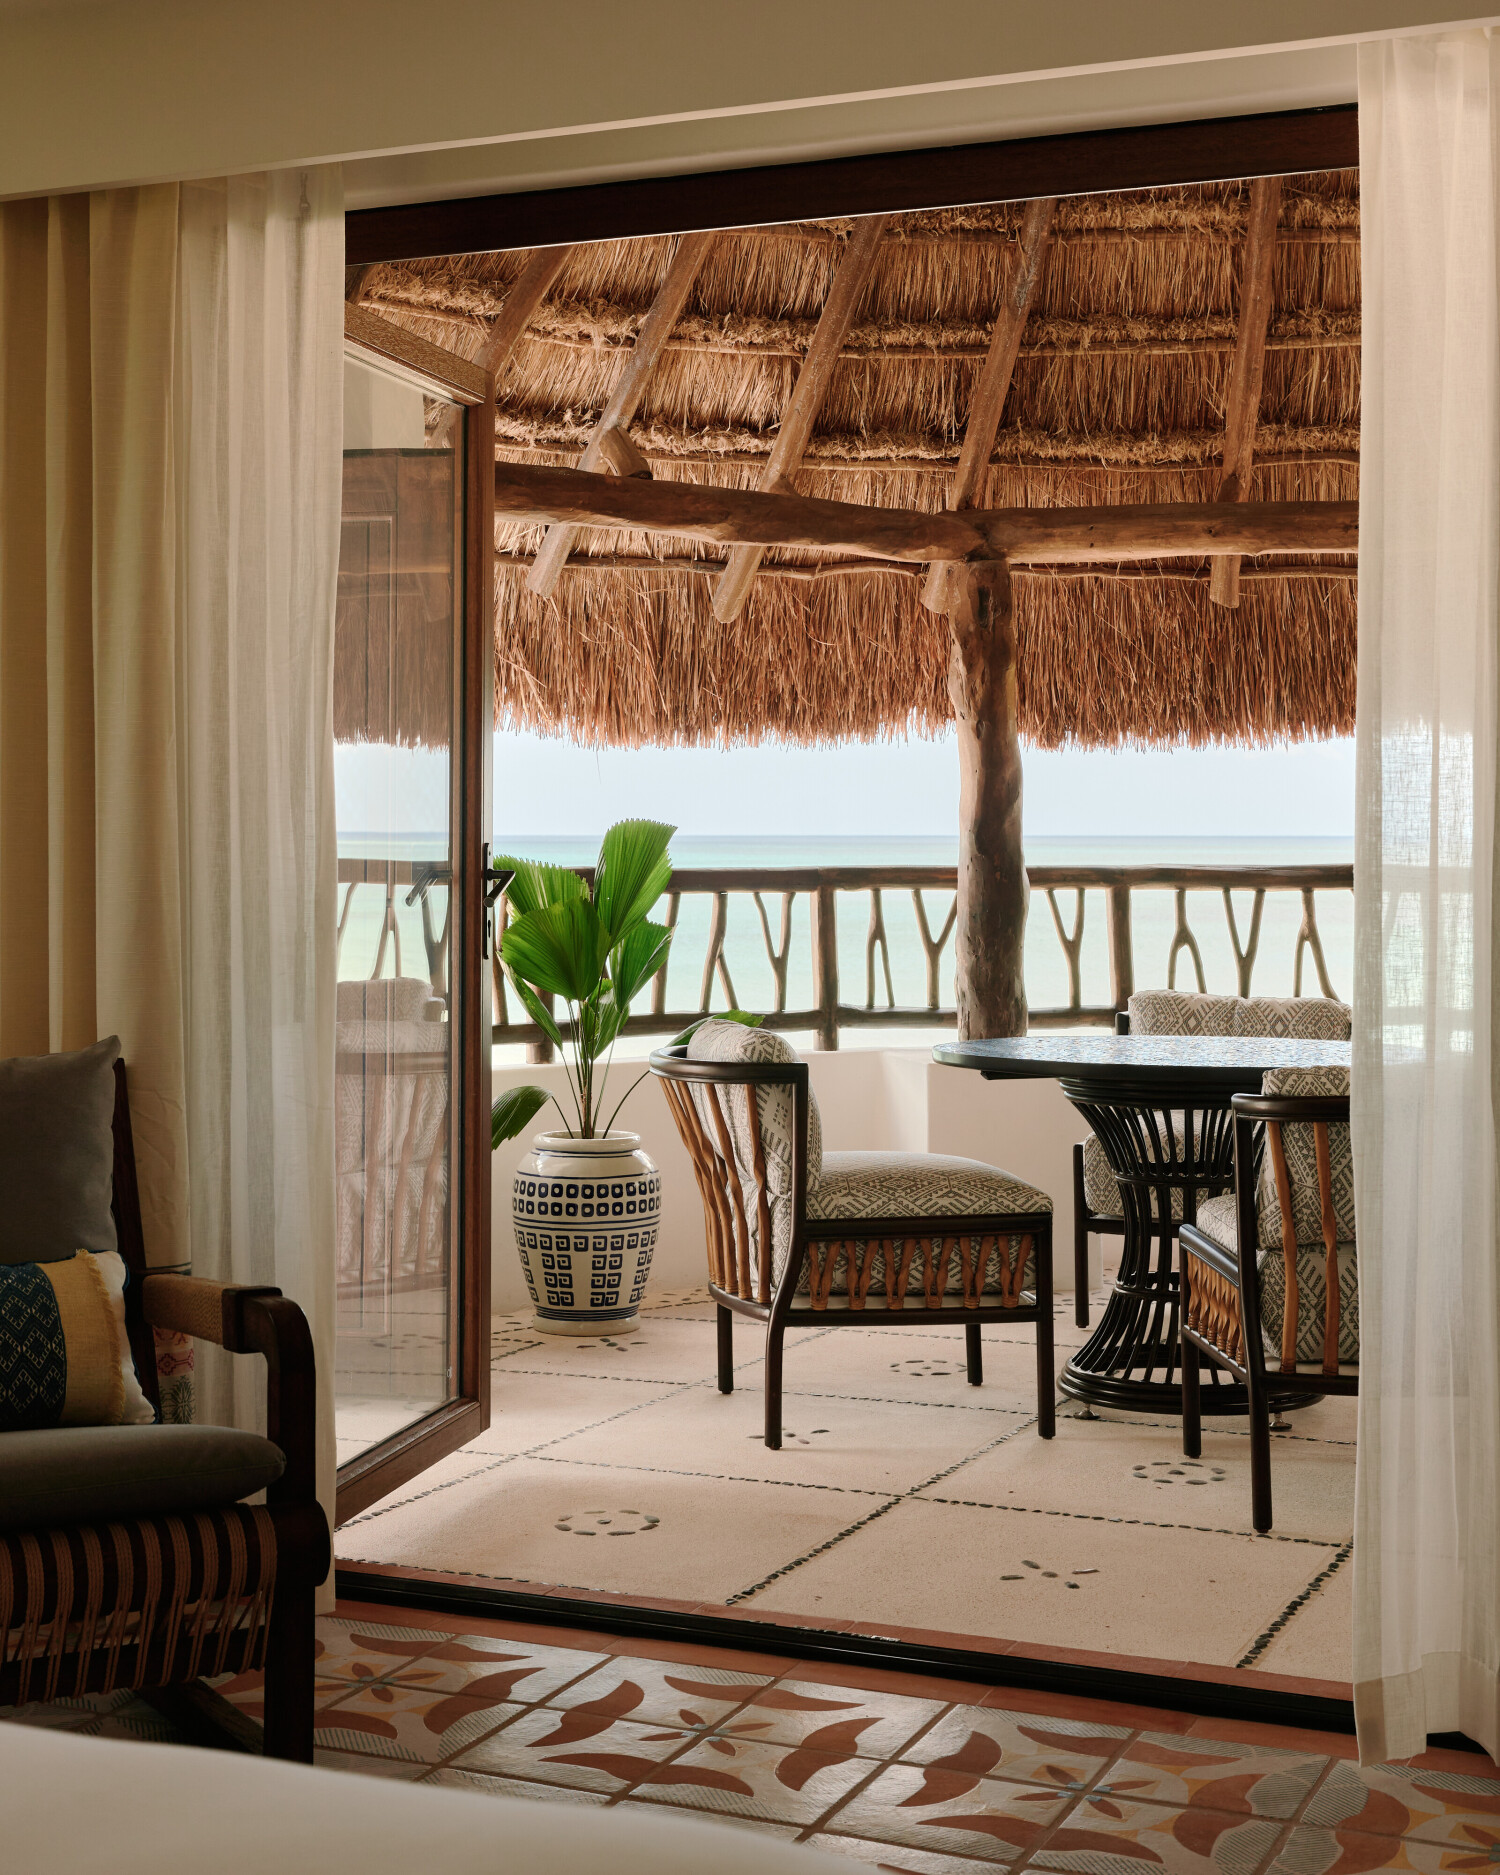 Maroma, A Belmond Hotel, Riviera Maya to Reopen in May 2023